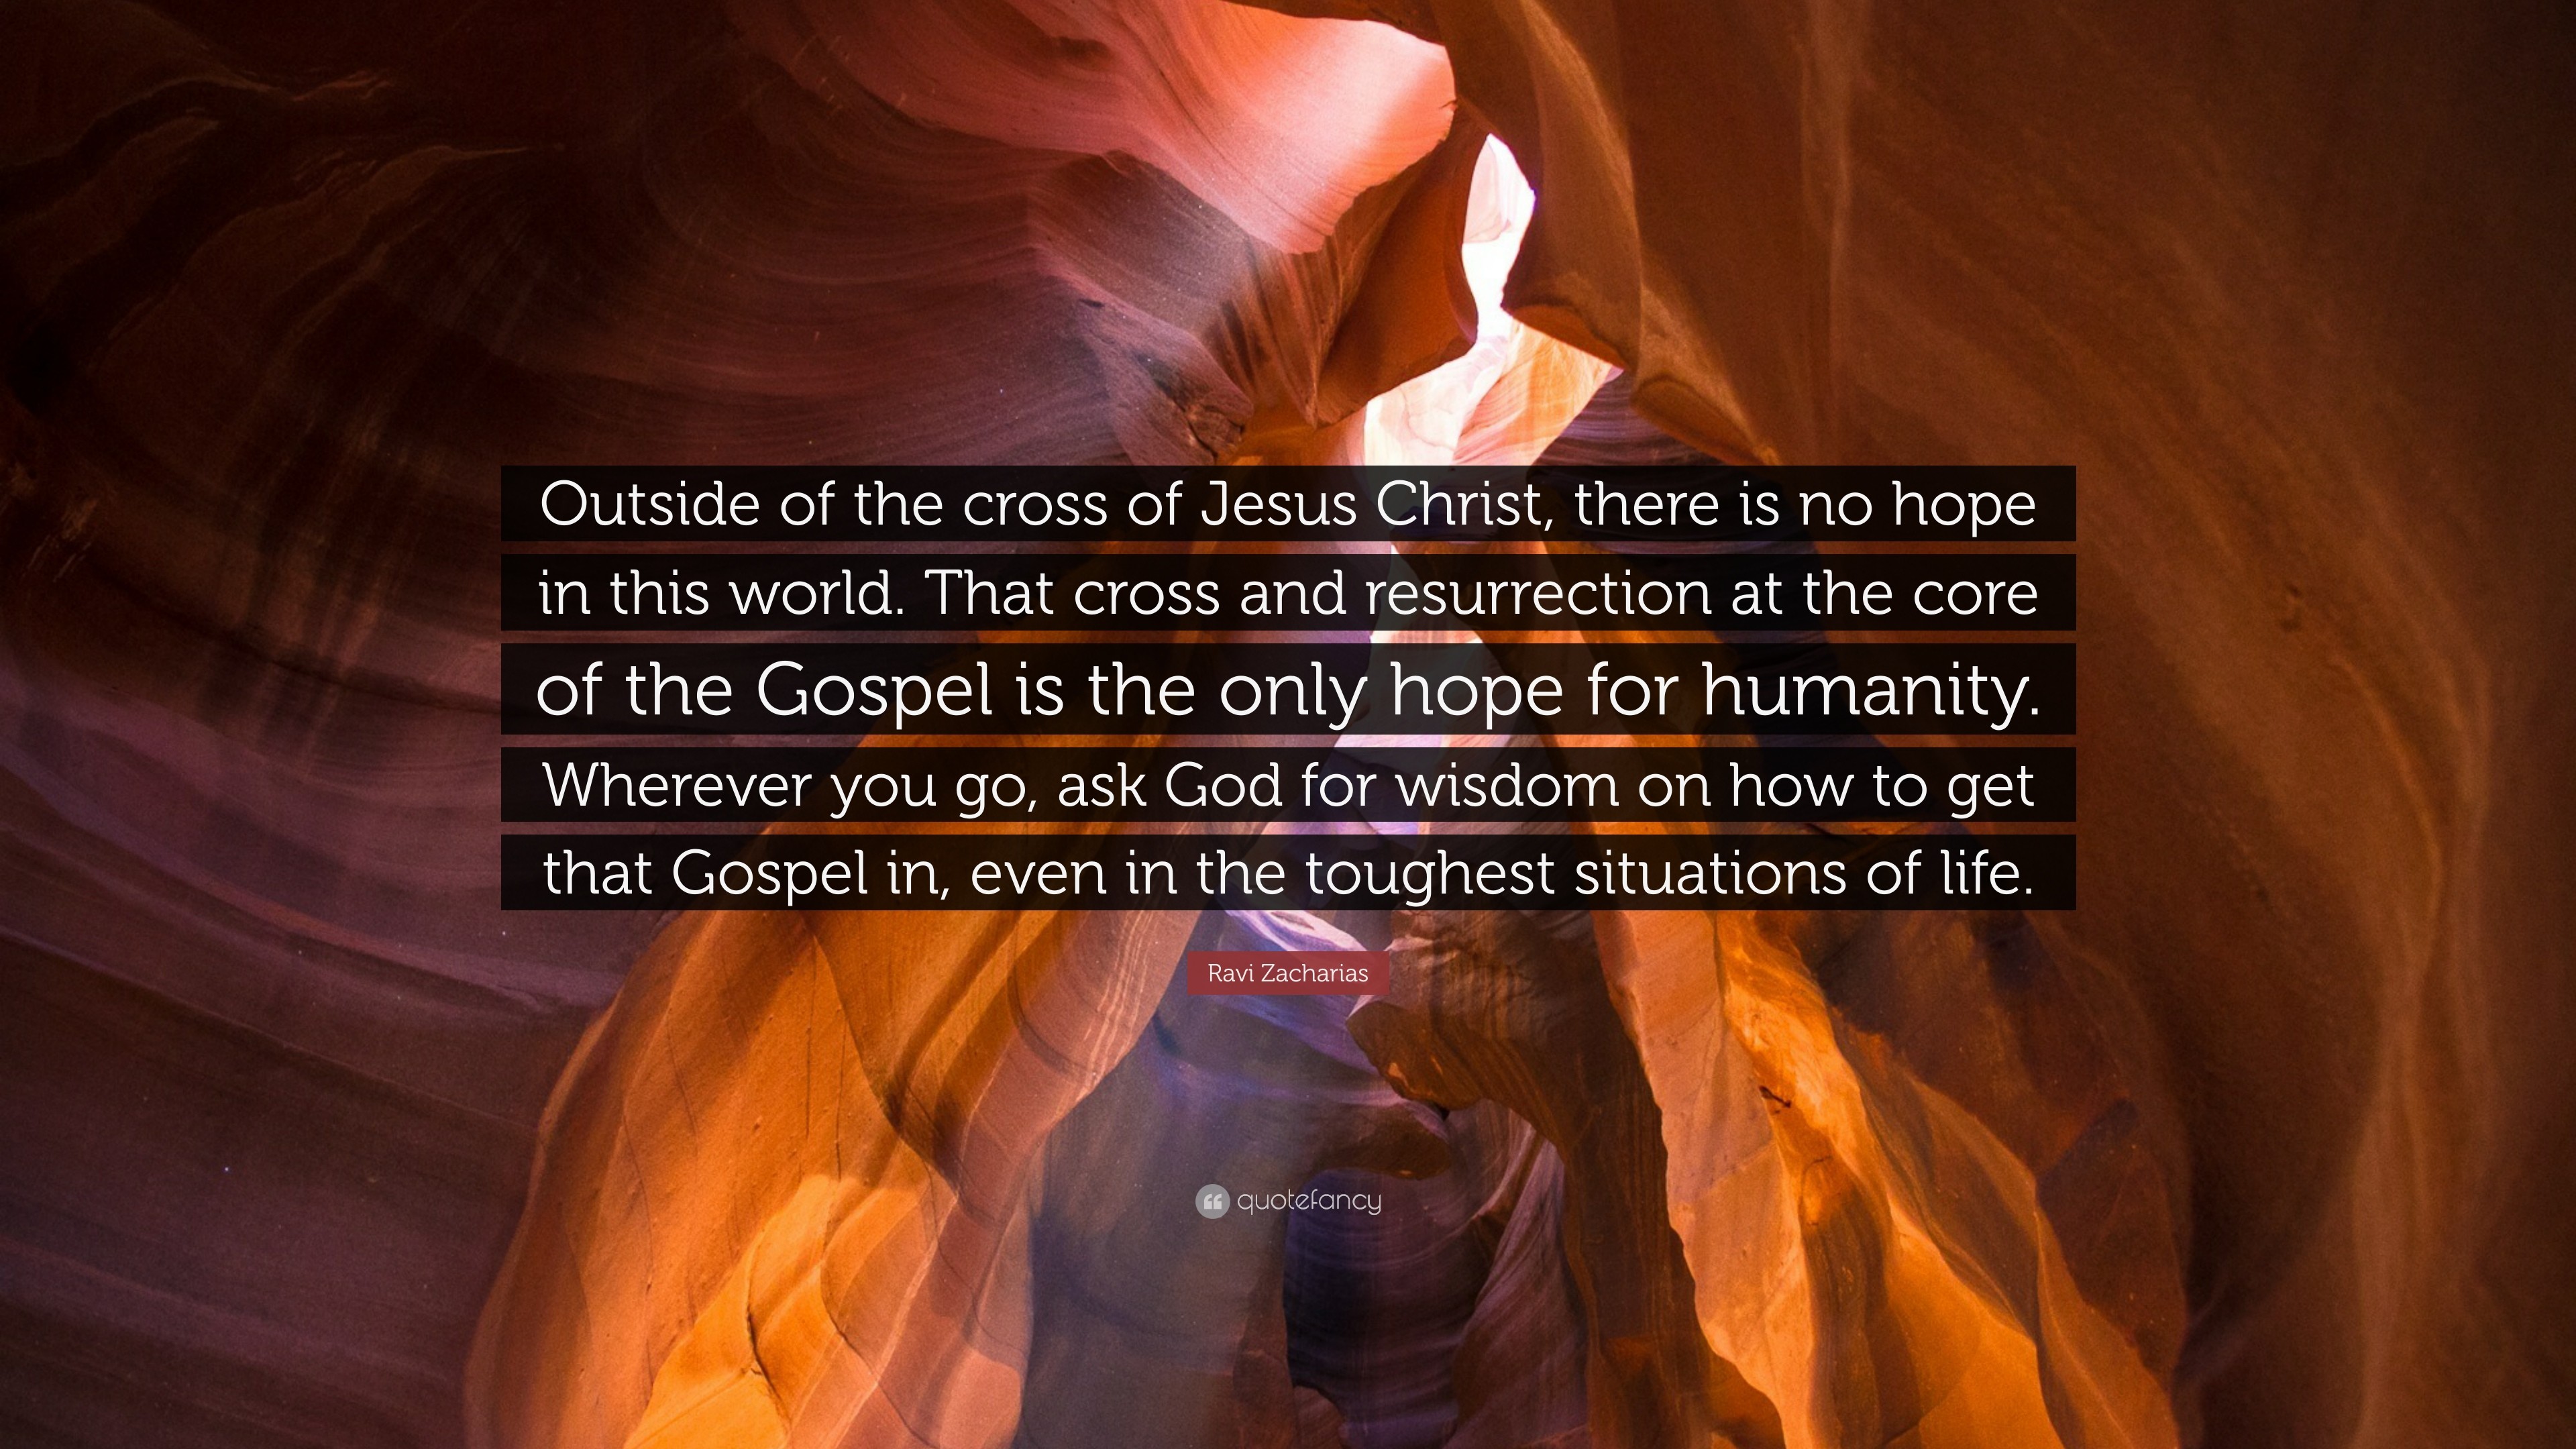 Ravi Zacharias Quote: “Outside of the cross of Jesus Christ, there is no